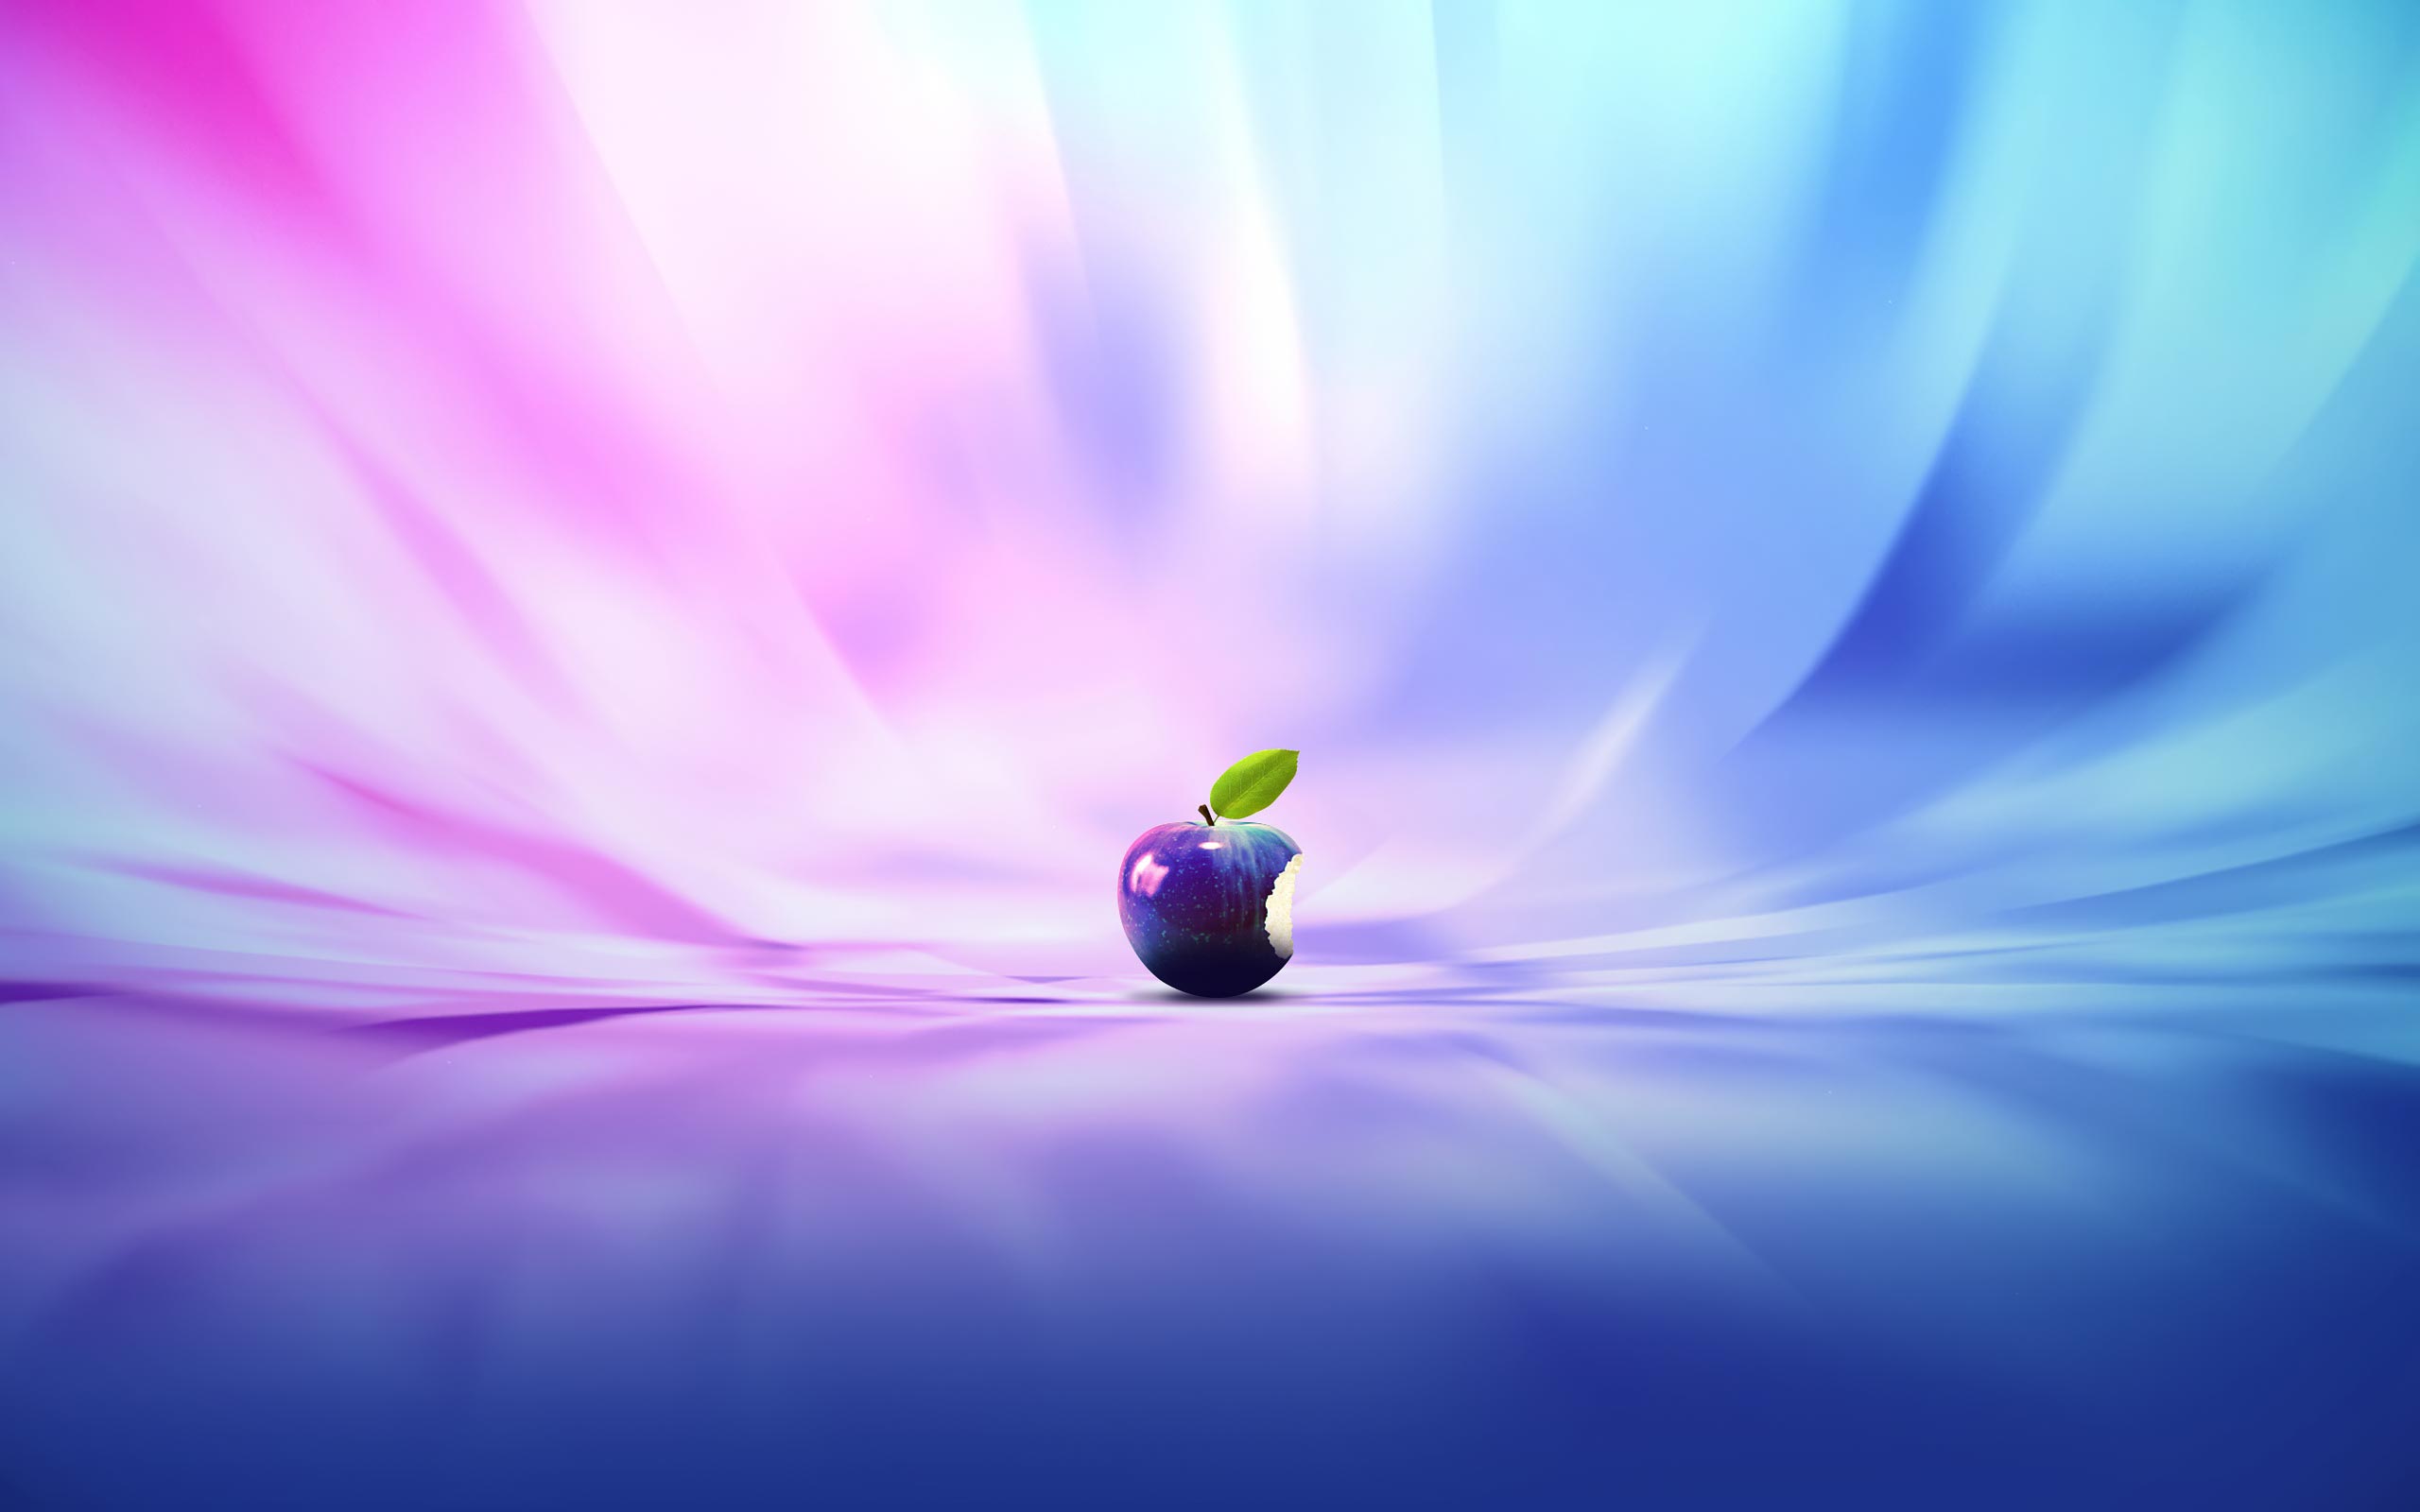 A creative wallpaper of an apple with a blue and purple background - 2560x1600